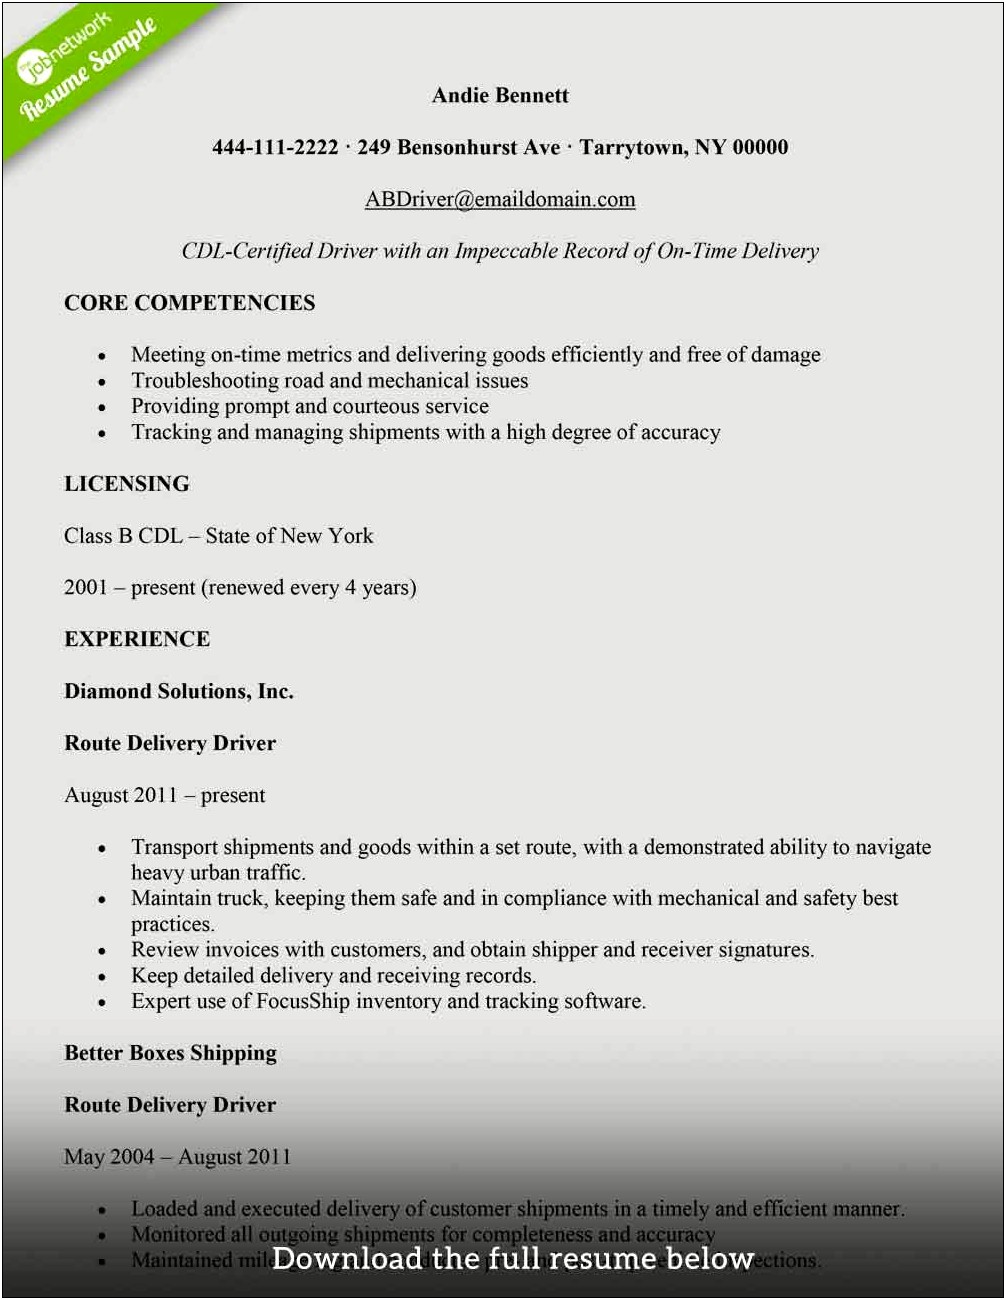 Skills To Add For Driving Resume